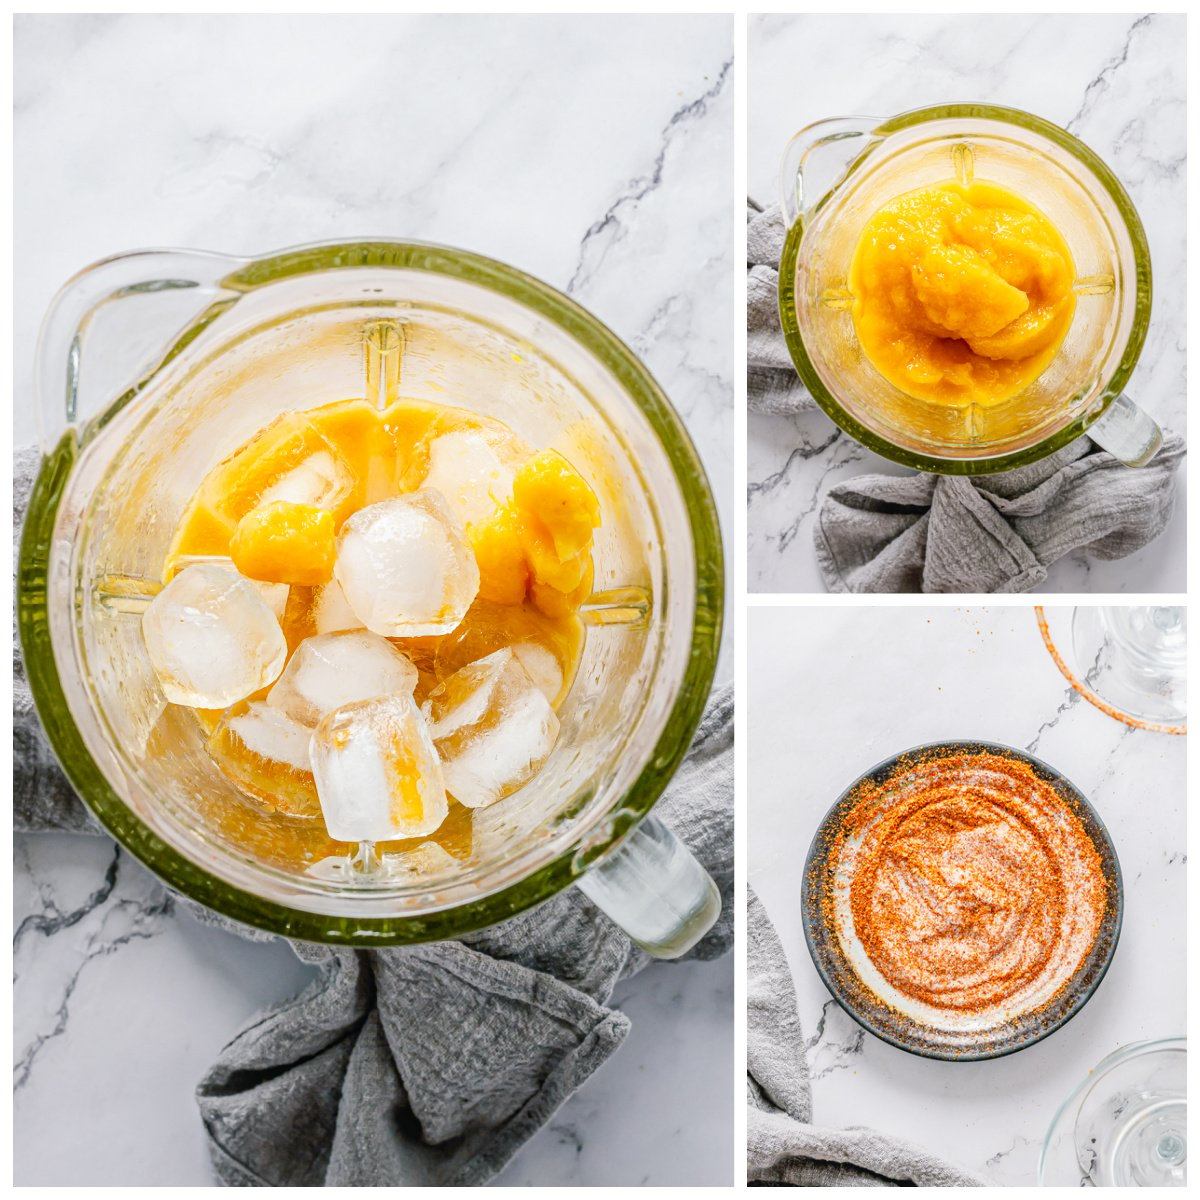 Step by step photos on how to make Mango Margaritas